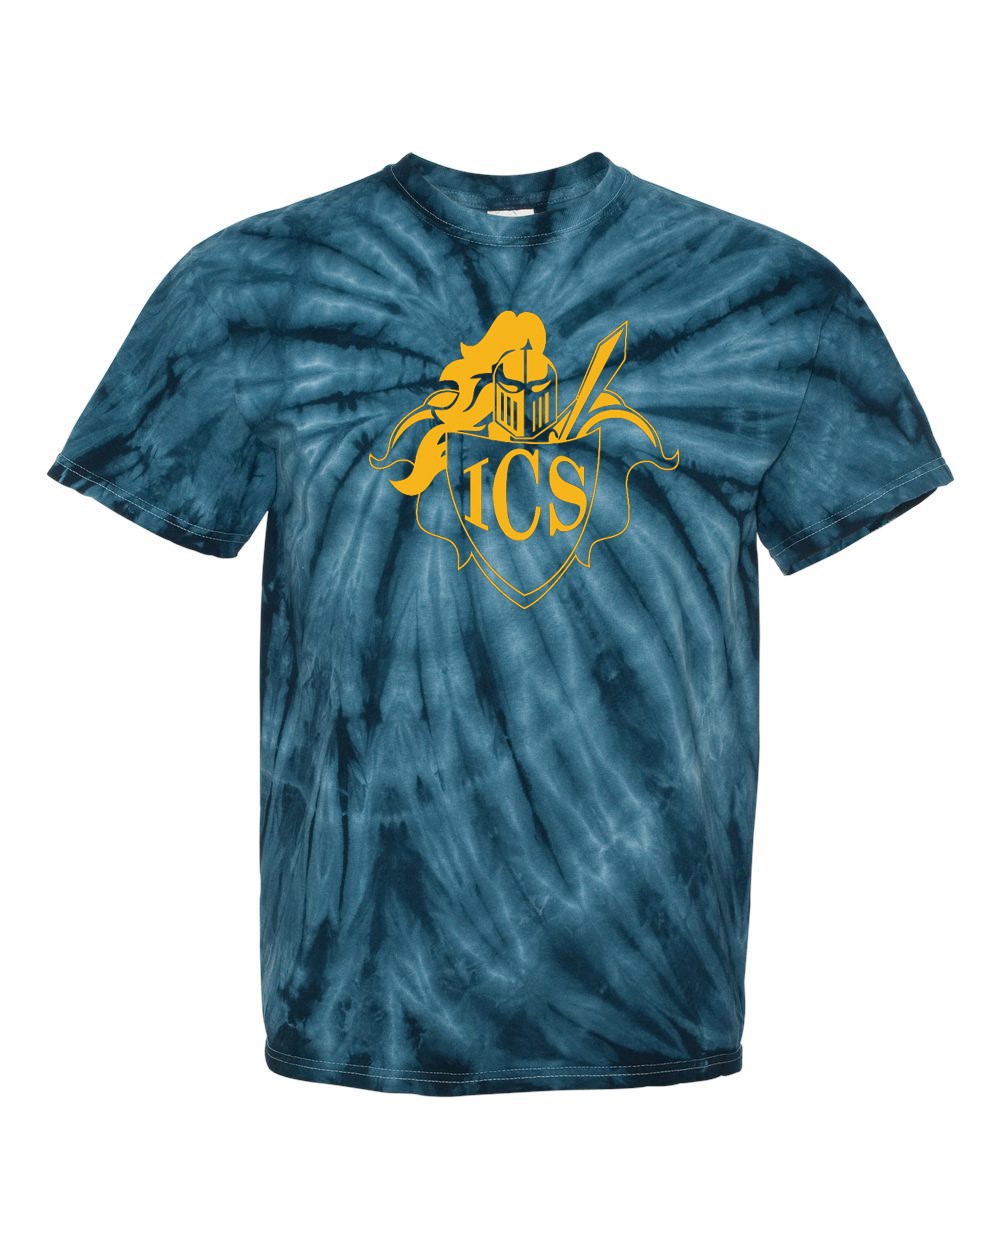 ICS Spirit S/S Tie Dye T-Shirt w/ Gold Logo - Please Allow 2-3 Weeks for Delivery